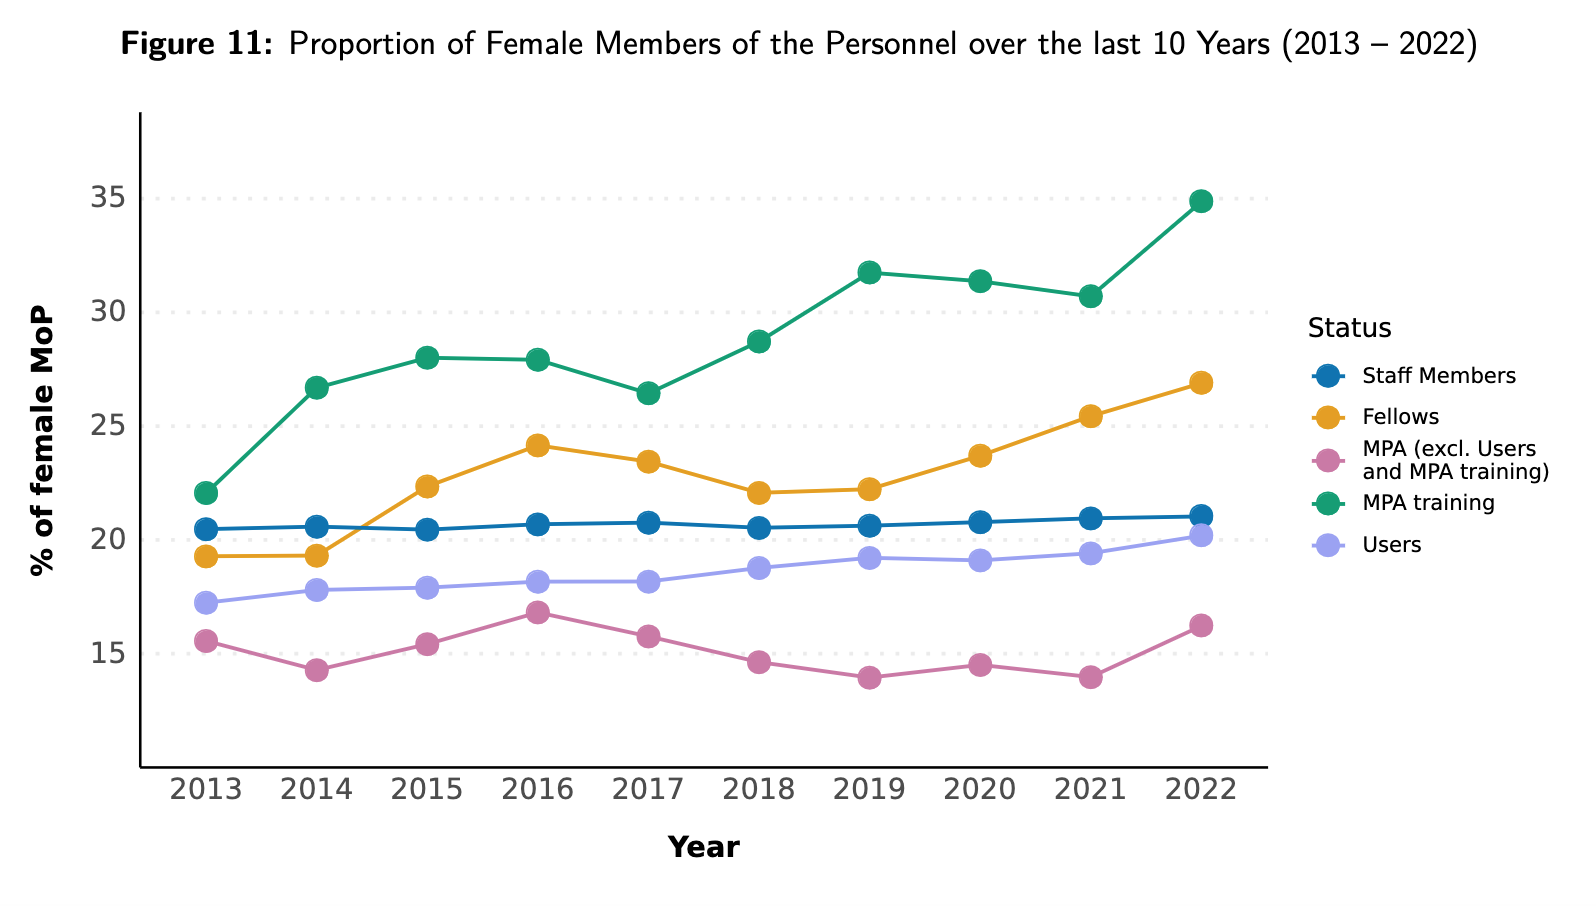 Proportion of female members to 2022